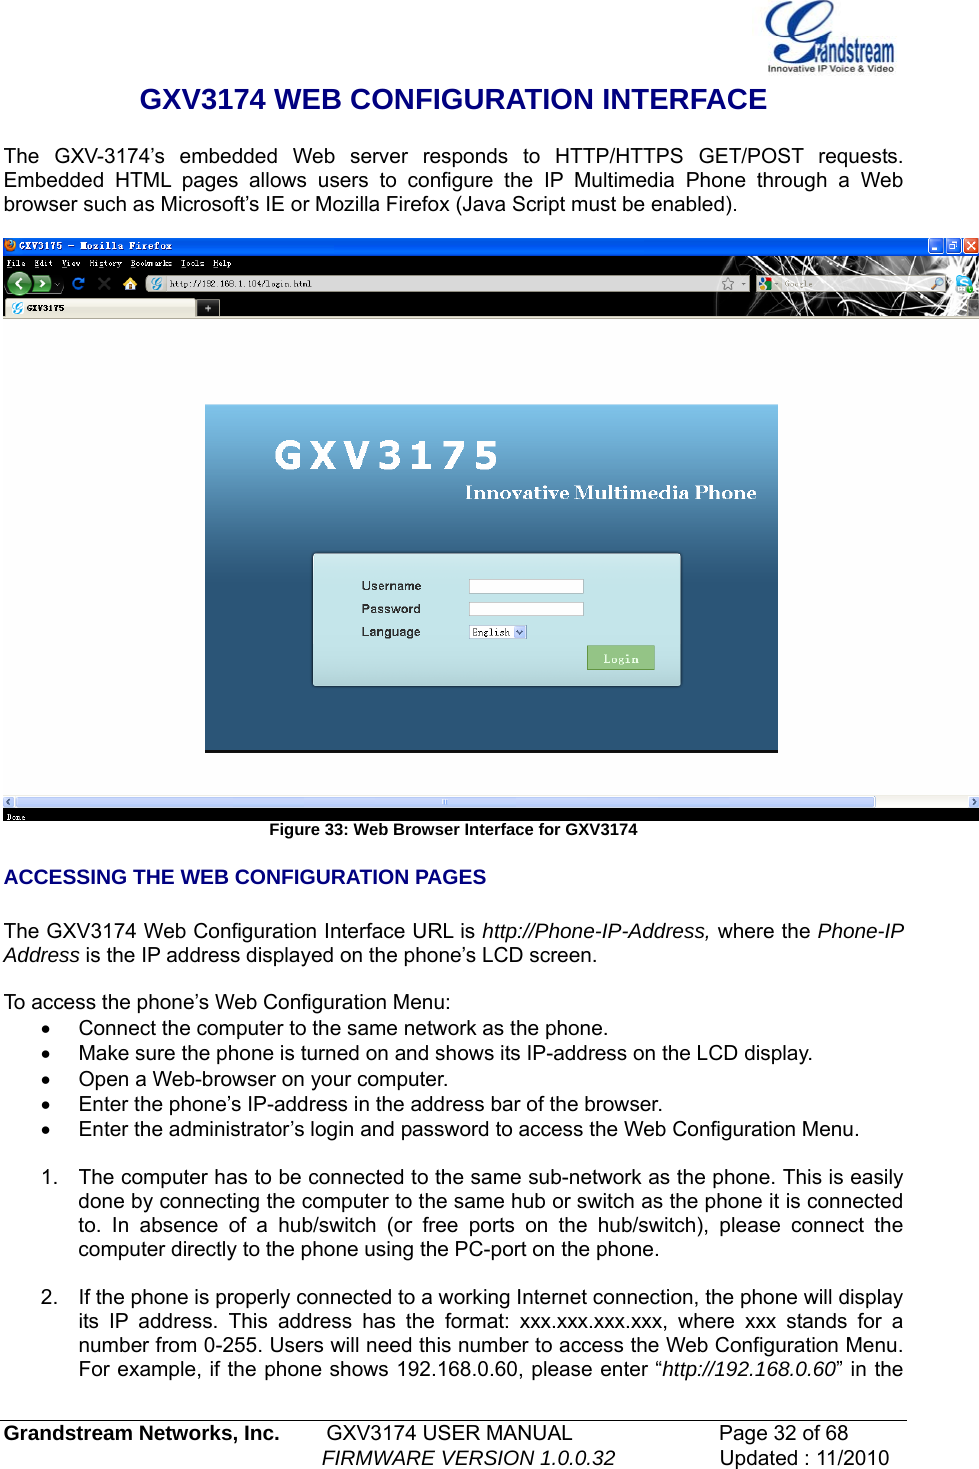   GXV3174 WEB CONFIGURATION INTERFACE  The GXV-3174’s embedded Web server responds to HTTP/HTTPS GET/POST requests. Embedded HTML pages allows users to configure the IP Multimedia Phone through a Web browser such as Microsoft’s IE or Mozilla Firefox (Java Script must be enabled).    Figure 33: Web Browser Interface for GXV3174 ACCESSING THE WEB CONFIGURATION PAGES  The GXV3174 Web Configuration Interface URL is http://Phone-IP-Address, where the Phone-IP Address is the IP address displayed on the phone’s LCD screen.  To access the phone’s Web Configuration Menu: •  Connect the computer to the same network as the phone. •  Make sure the phone is turned on and shows its IP-address on the LCD display. •  Open a Web-browser on your computer. •  Enter the phone’s IP-address in the address bar of the browser. •  Enter the administrator’s login and password to access the Web Configuration Menu.    1.  The computer has to be connected to the same sub-network as the phone. This is easily done by connecting the computer to the same hub or switch as the phone it is connected to. In absence of a hub/switch (or free ports on the hub/switch), please connect the computer directly to the phone using the PC-port on the phone.  2.  If the phone is properly connected to a working Internet connection, the phone will display its IP address. This address has the format: xxx.xxx.xxx.xxx, where xxx stands for a number from 0-255. Users will need this number to access the Web Configuration Menu. For example, if the phone shows 192.168.0.60, please enter “http://192.168.0.60” in the Grandstream Networks, Inc.        GXV3174 USER MANUAL                      Page 32 of 68                                                        FIRMWARE VERSION 1.0.0.32                  Updated : 11/2010  